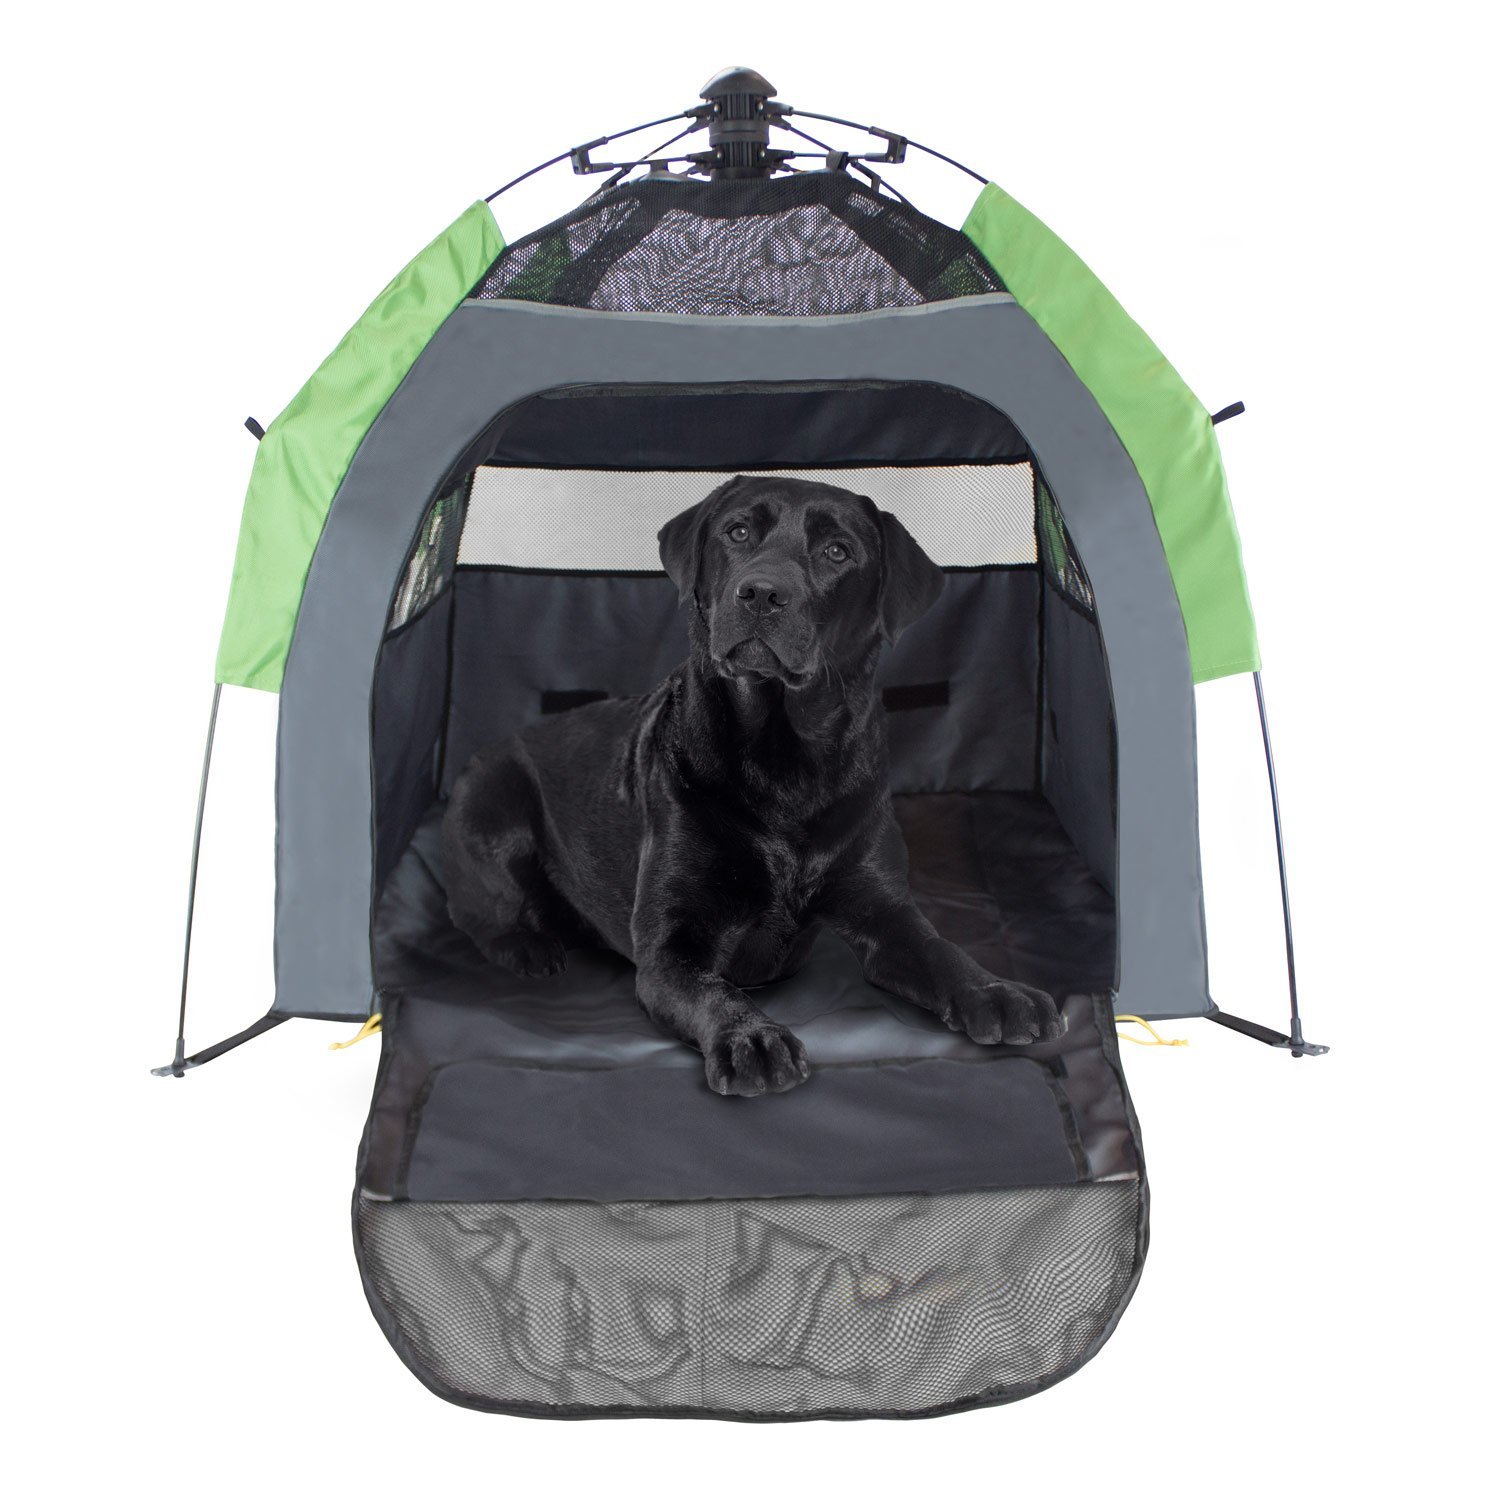 Best Tent For Camping With Dogs Dog N Treats